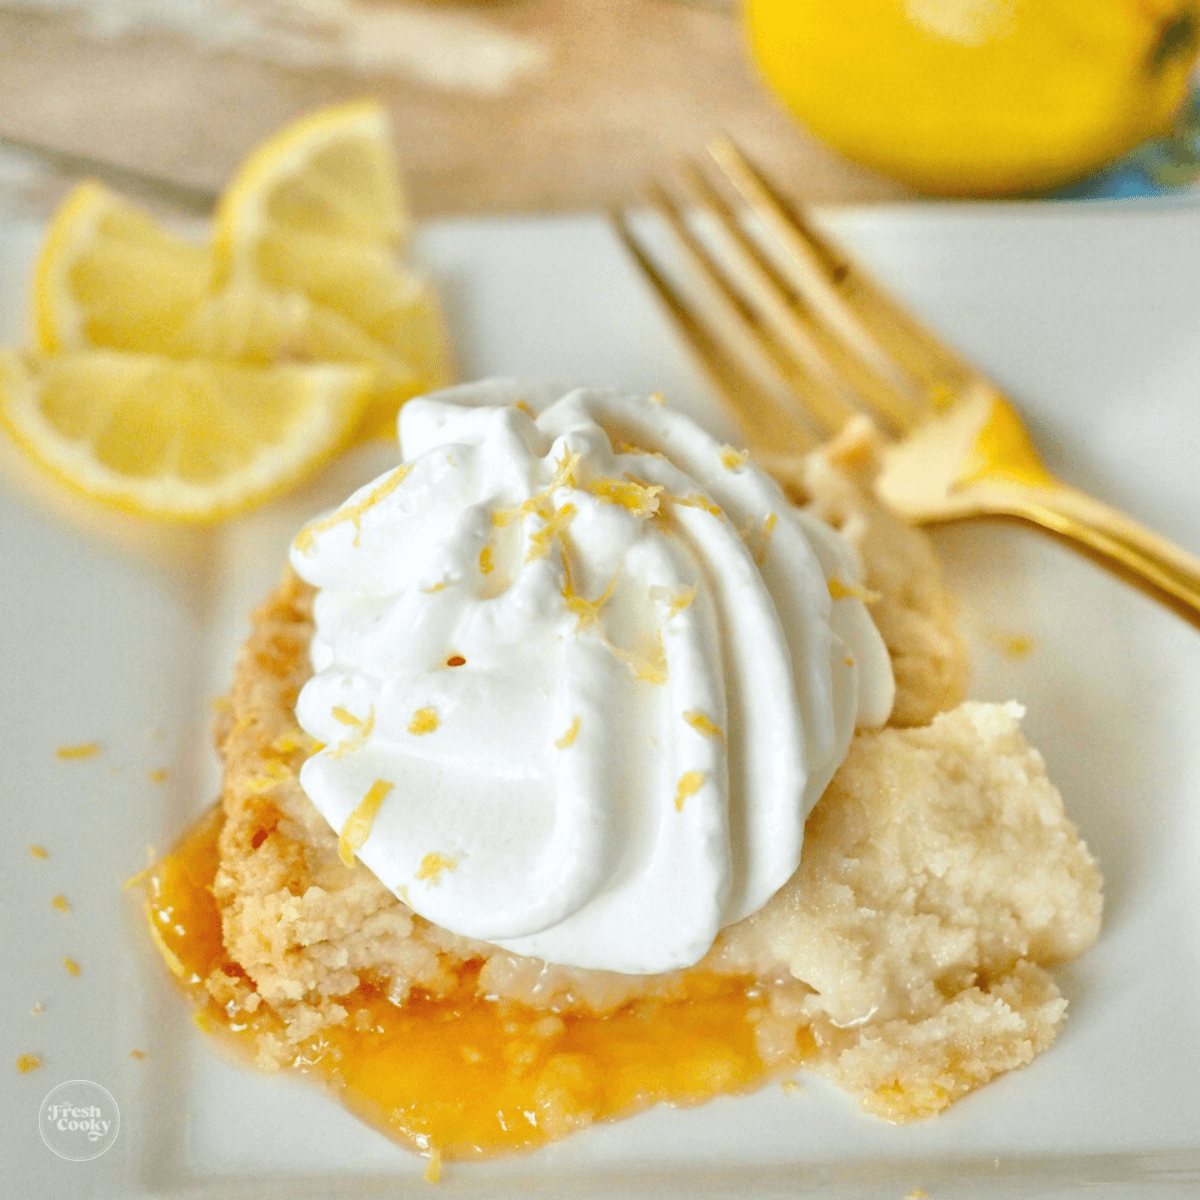 Slice of lemon dump cake on plate topped with whipped cream, lemon wedges and gold fork in background.